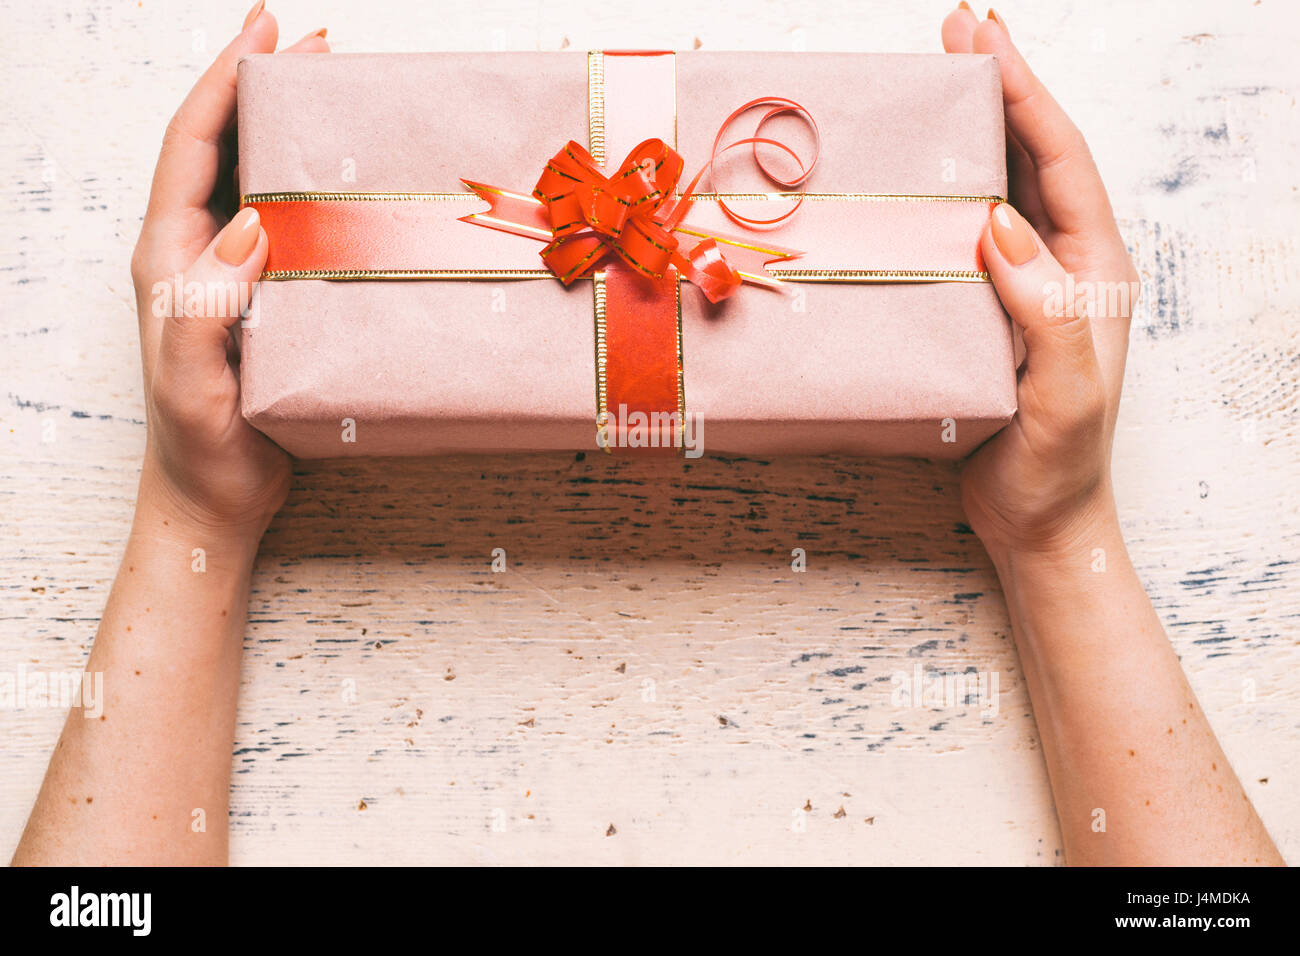 Hands of woman holding gift box Stock Photo